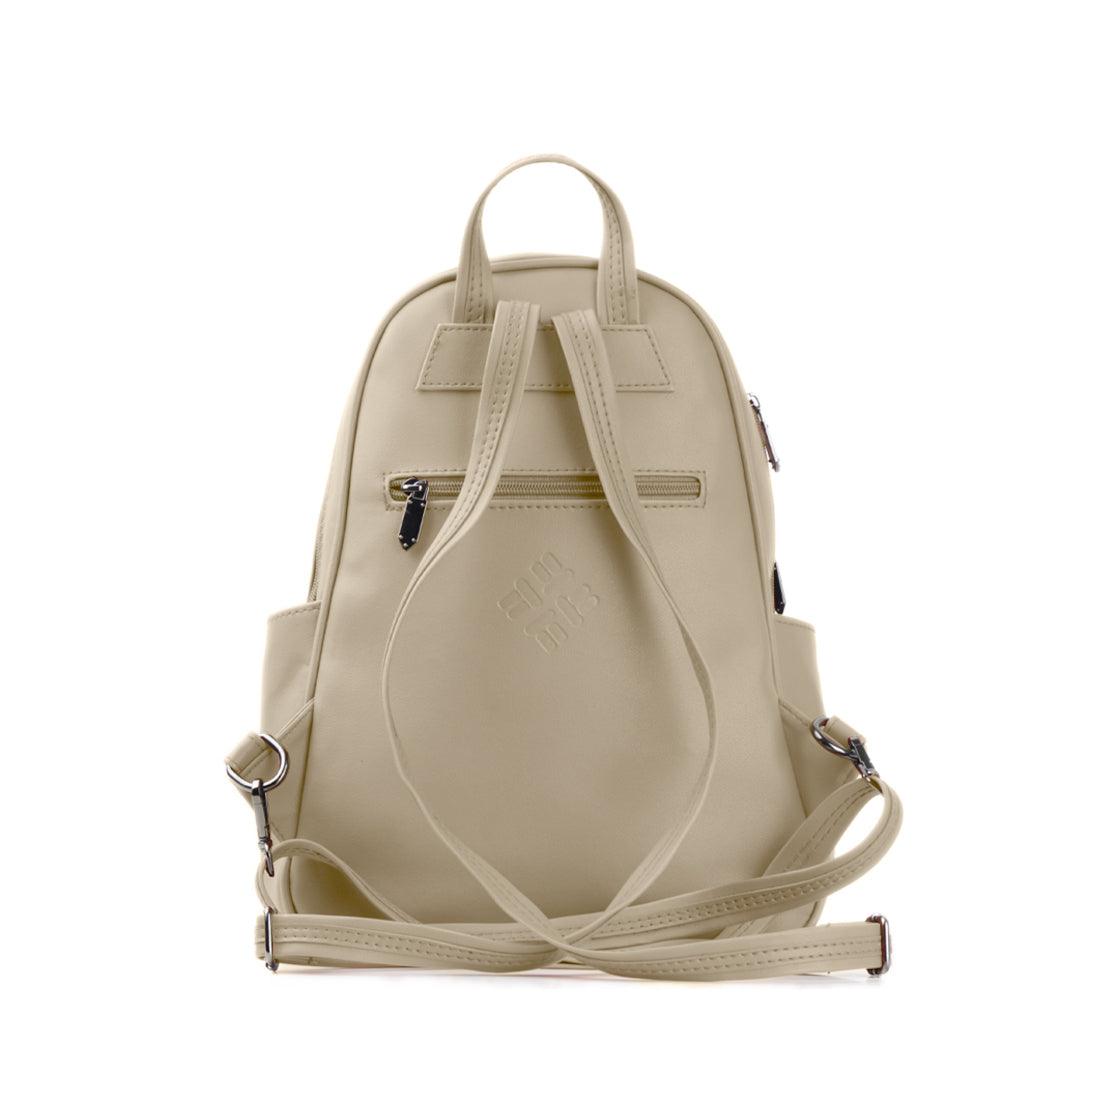 Beige Vivid Backpack Save the bees - CANVAEGYPT